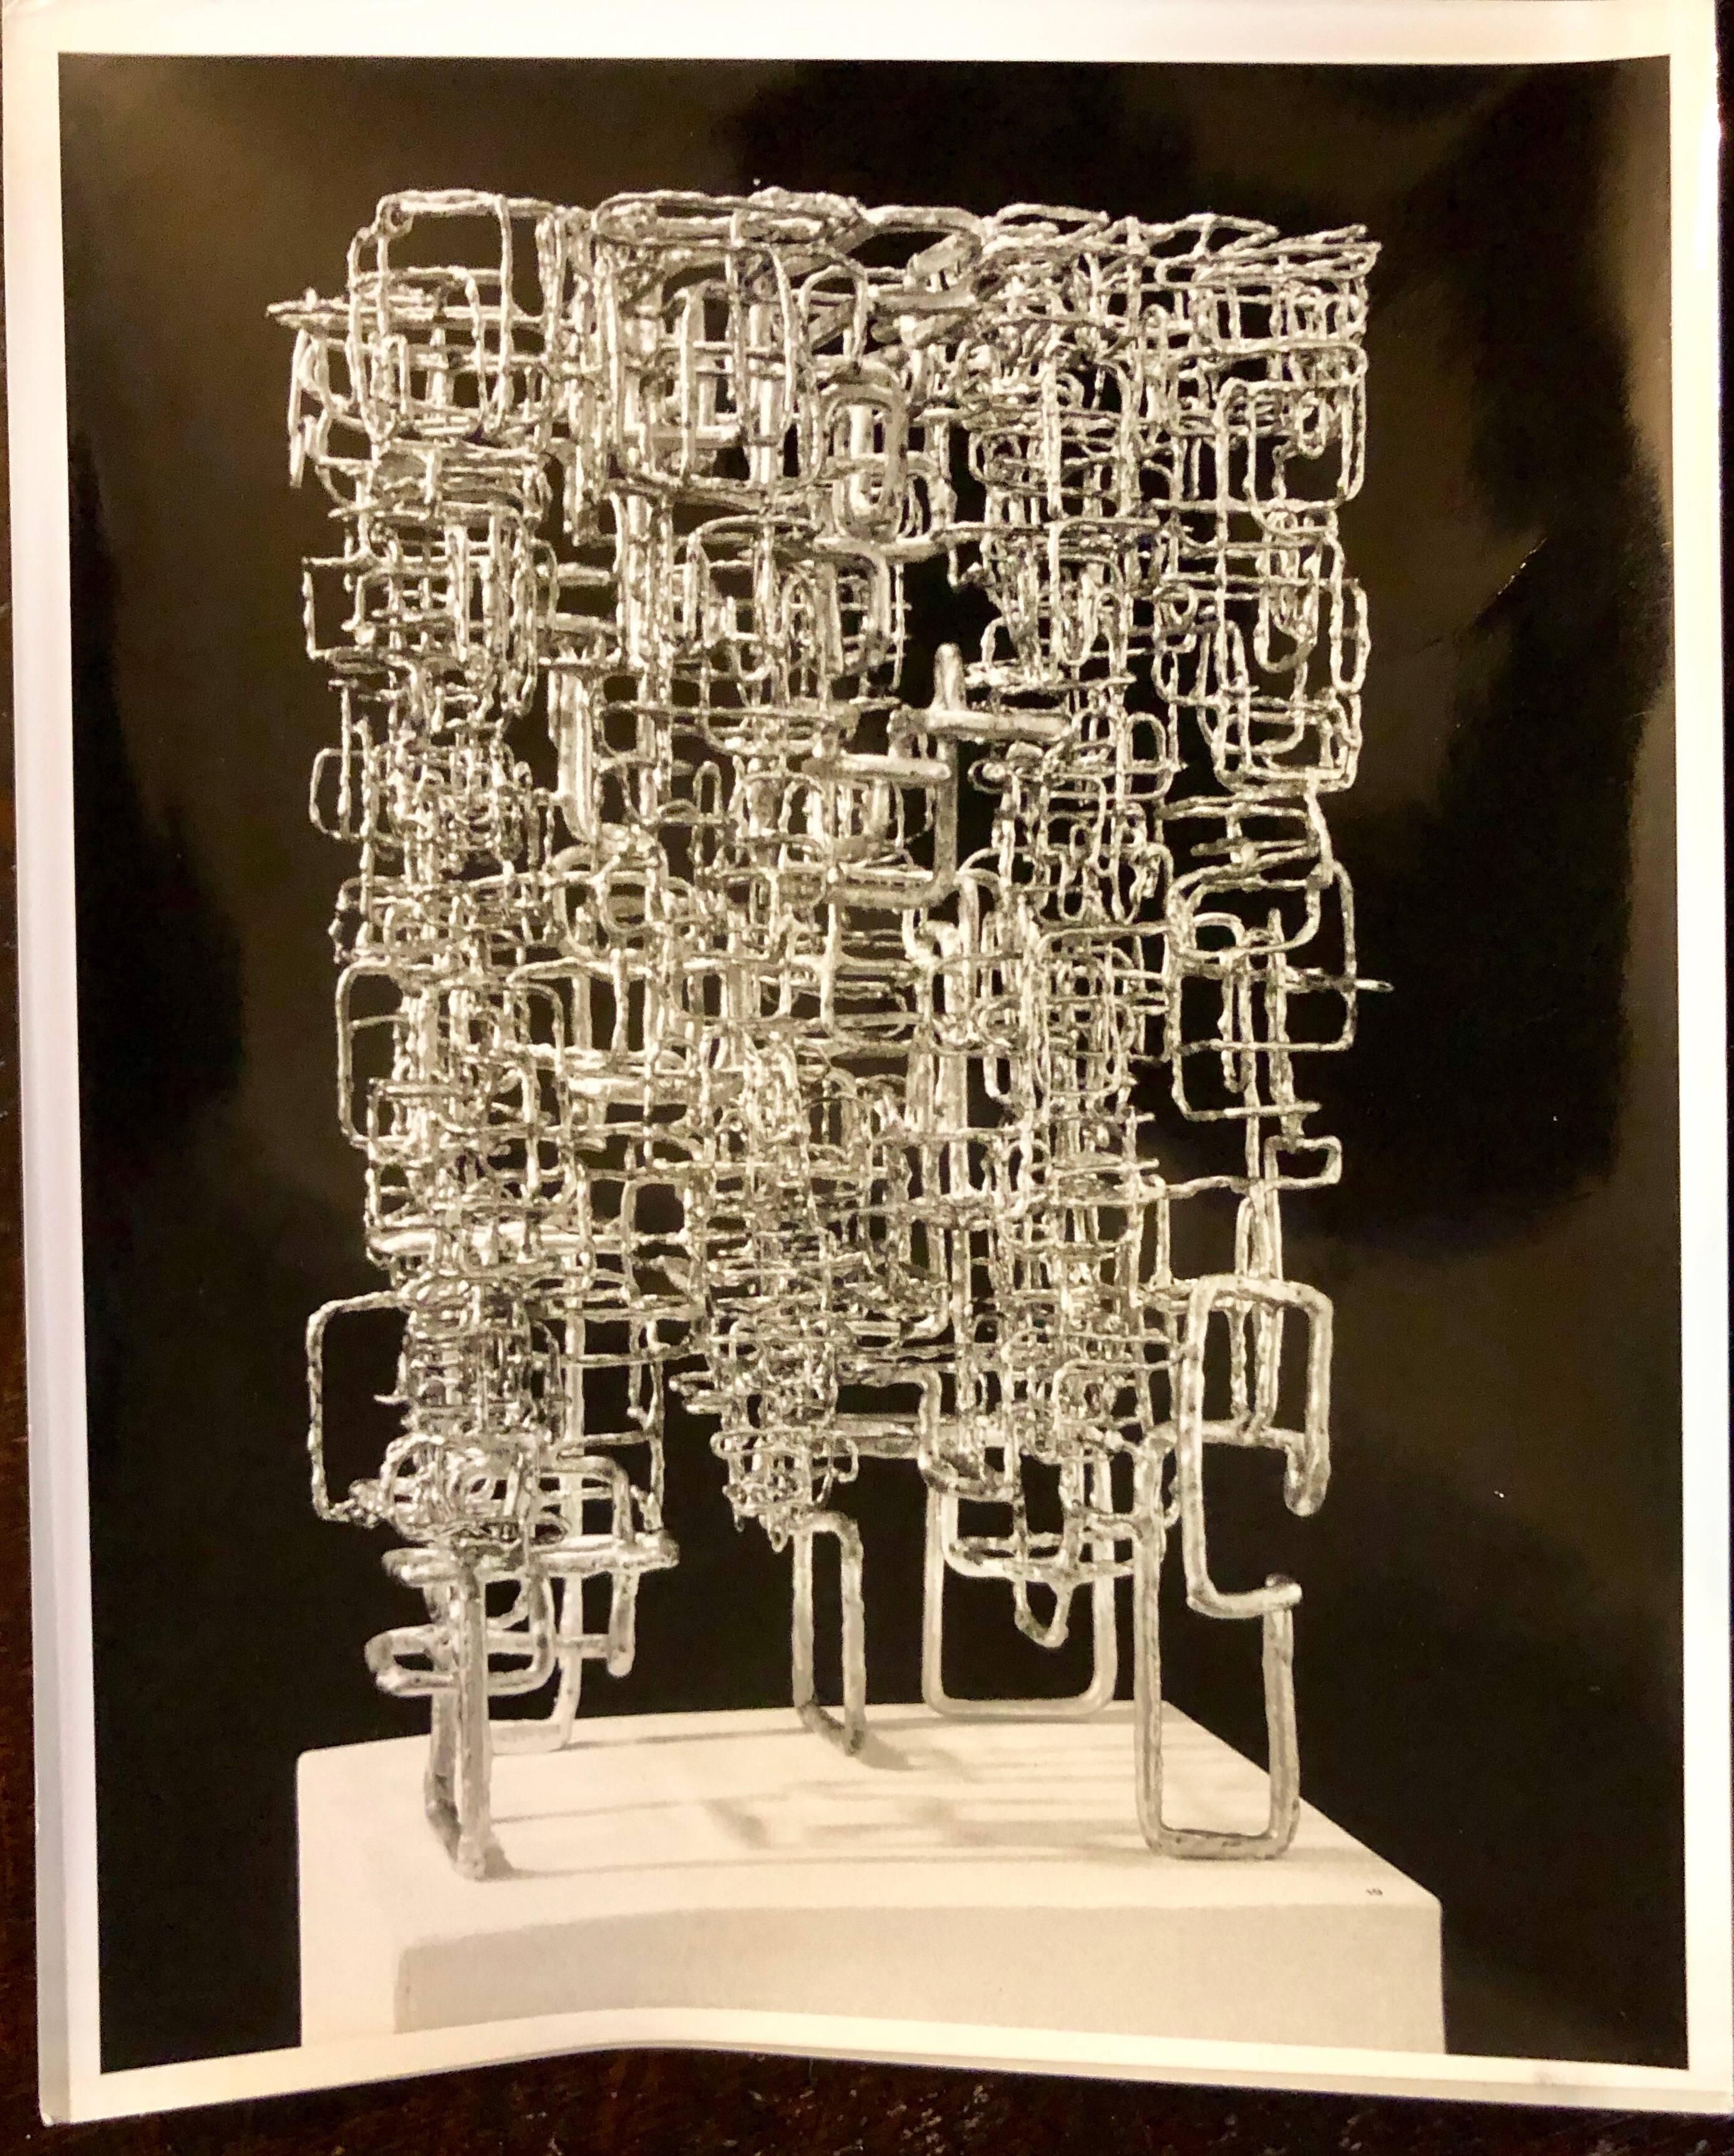 Unknown Abstract Photograph - Vintage Silver Gelatin Photo of Ibram Lassaw Modernist Sculpture (Photograph)